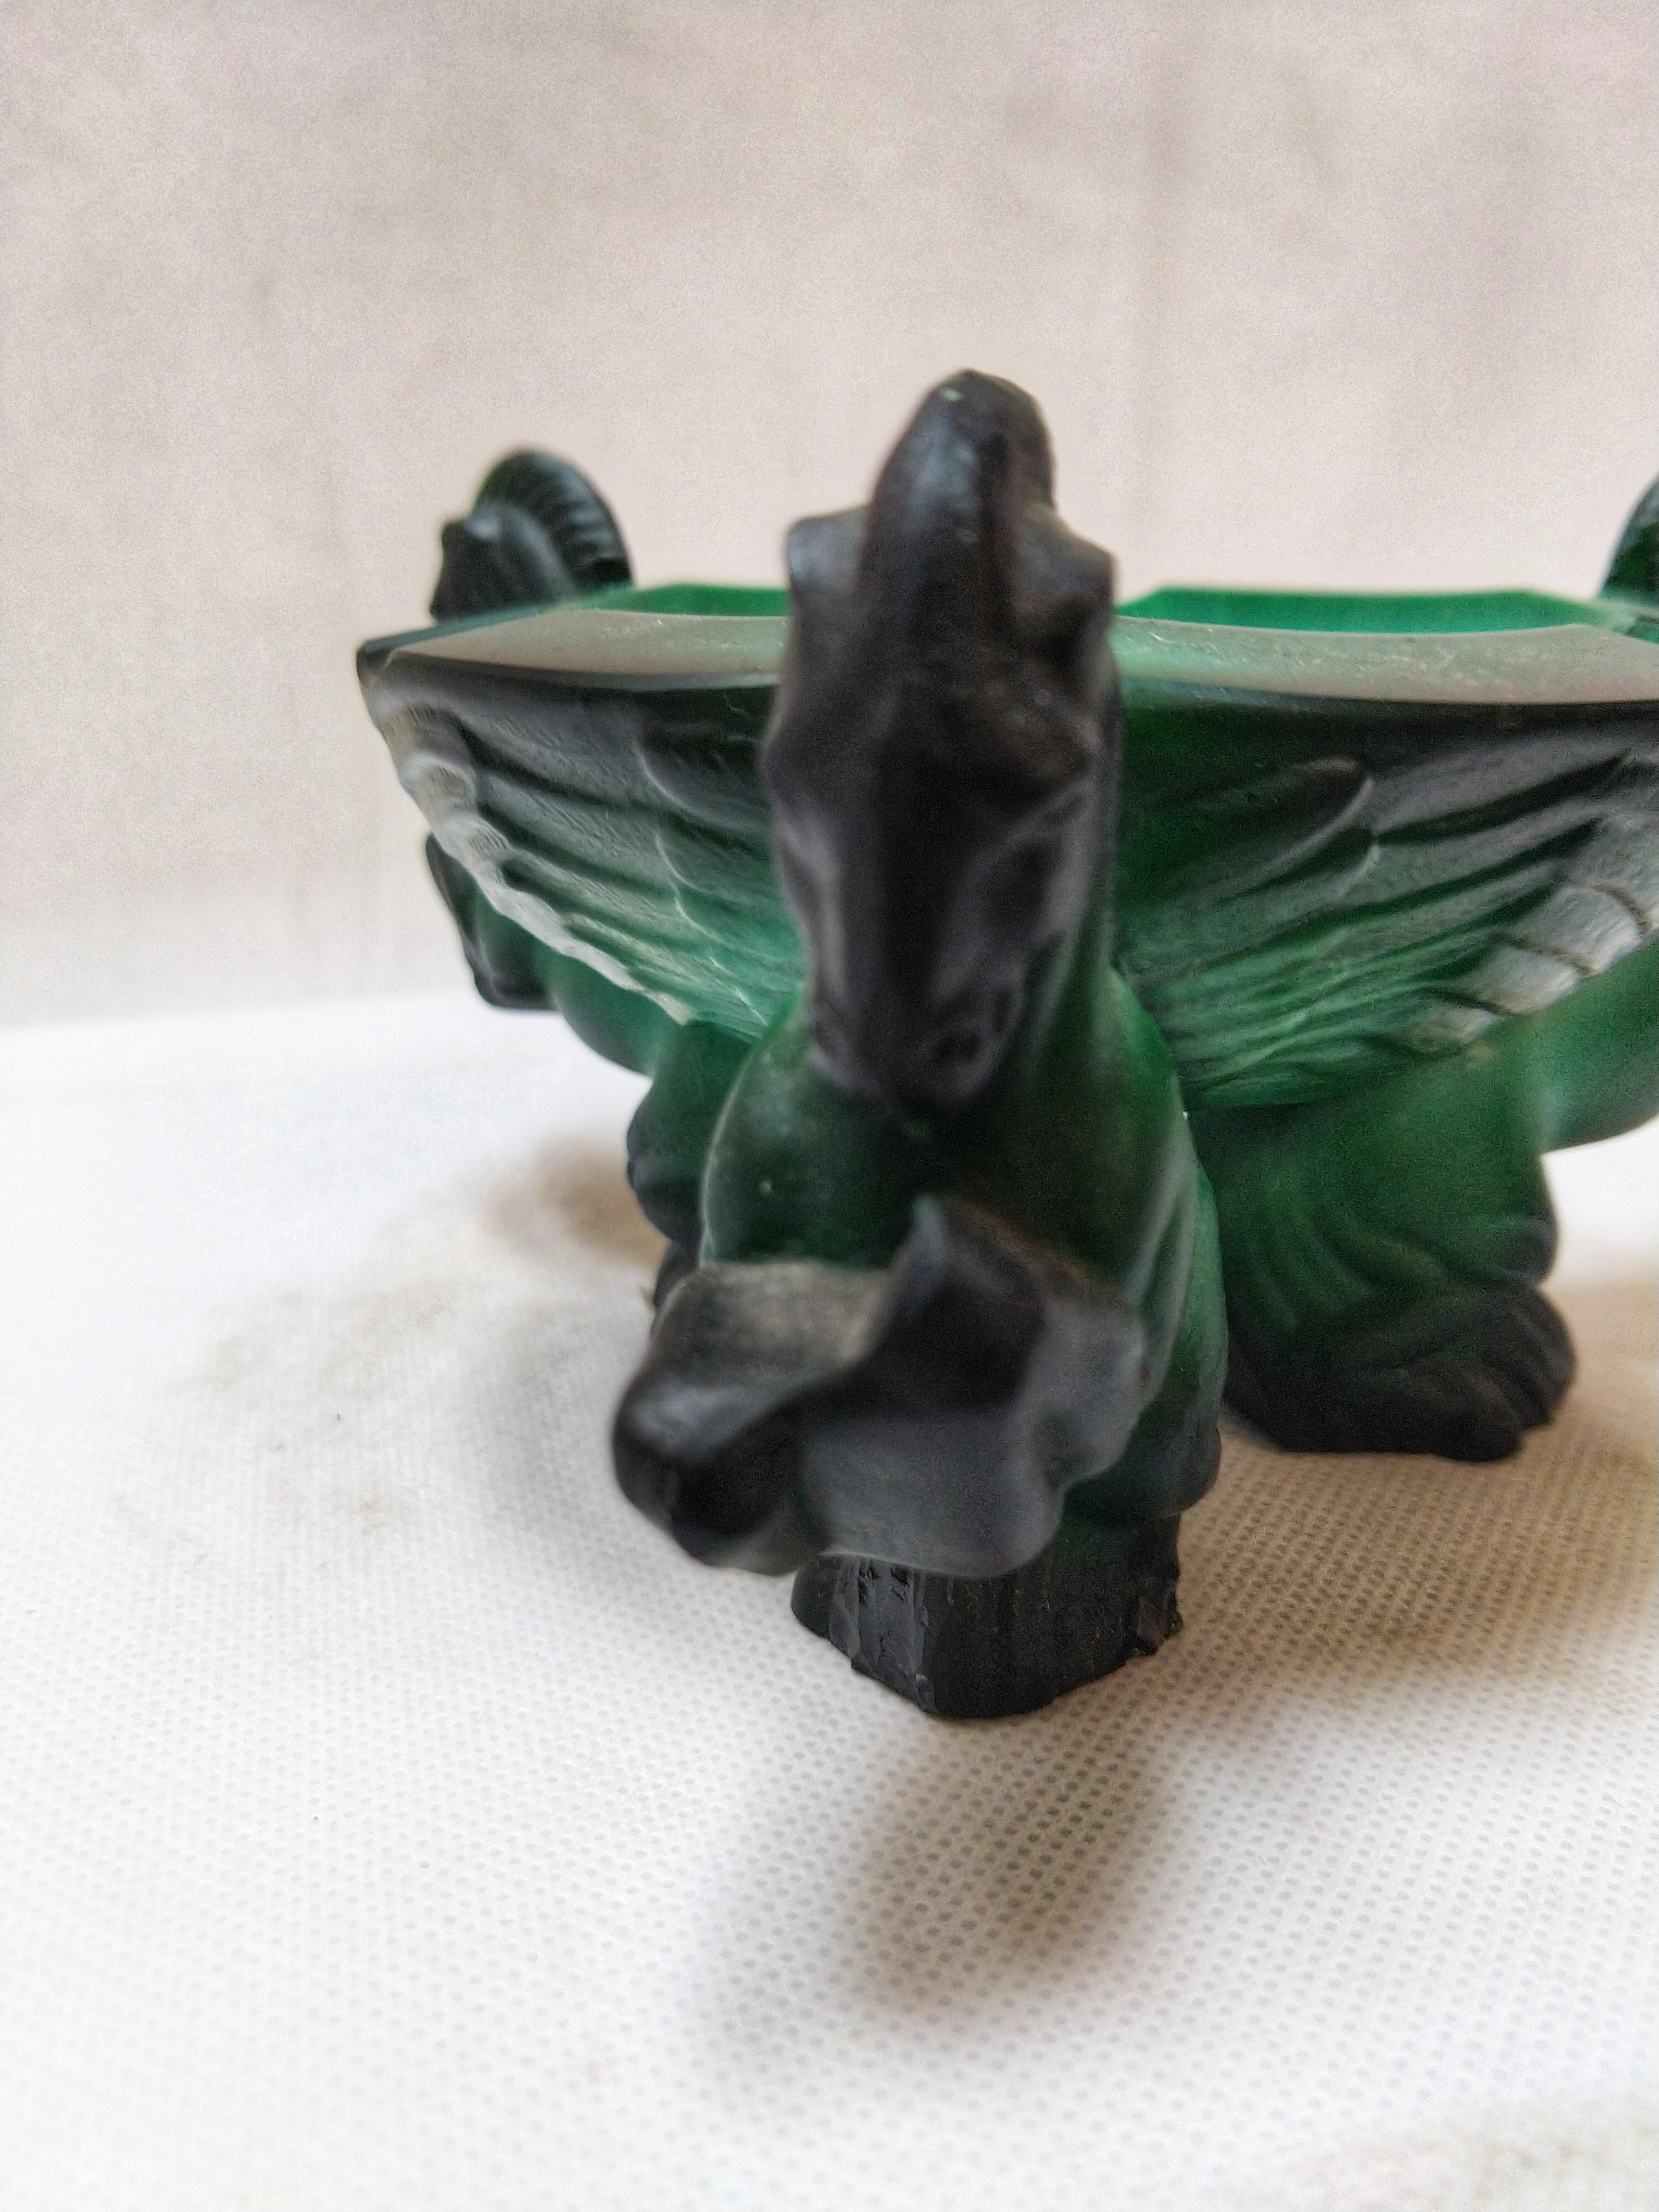 Beautiful ashtray in malachite Moser from the early 1900s with three rampant horses.

Malachite is a copper carbonate hydroxide mineral, with the formula Cu2CO3(OH)2. This opaque, green banded mineral crystallizes in the monoclinic crystal system,